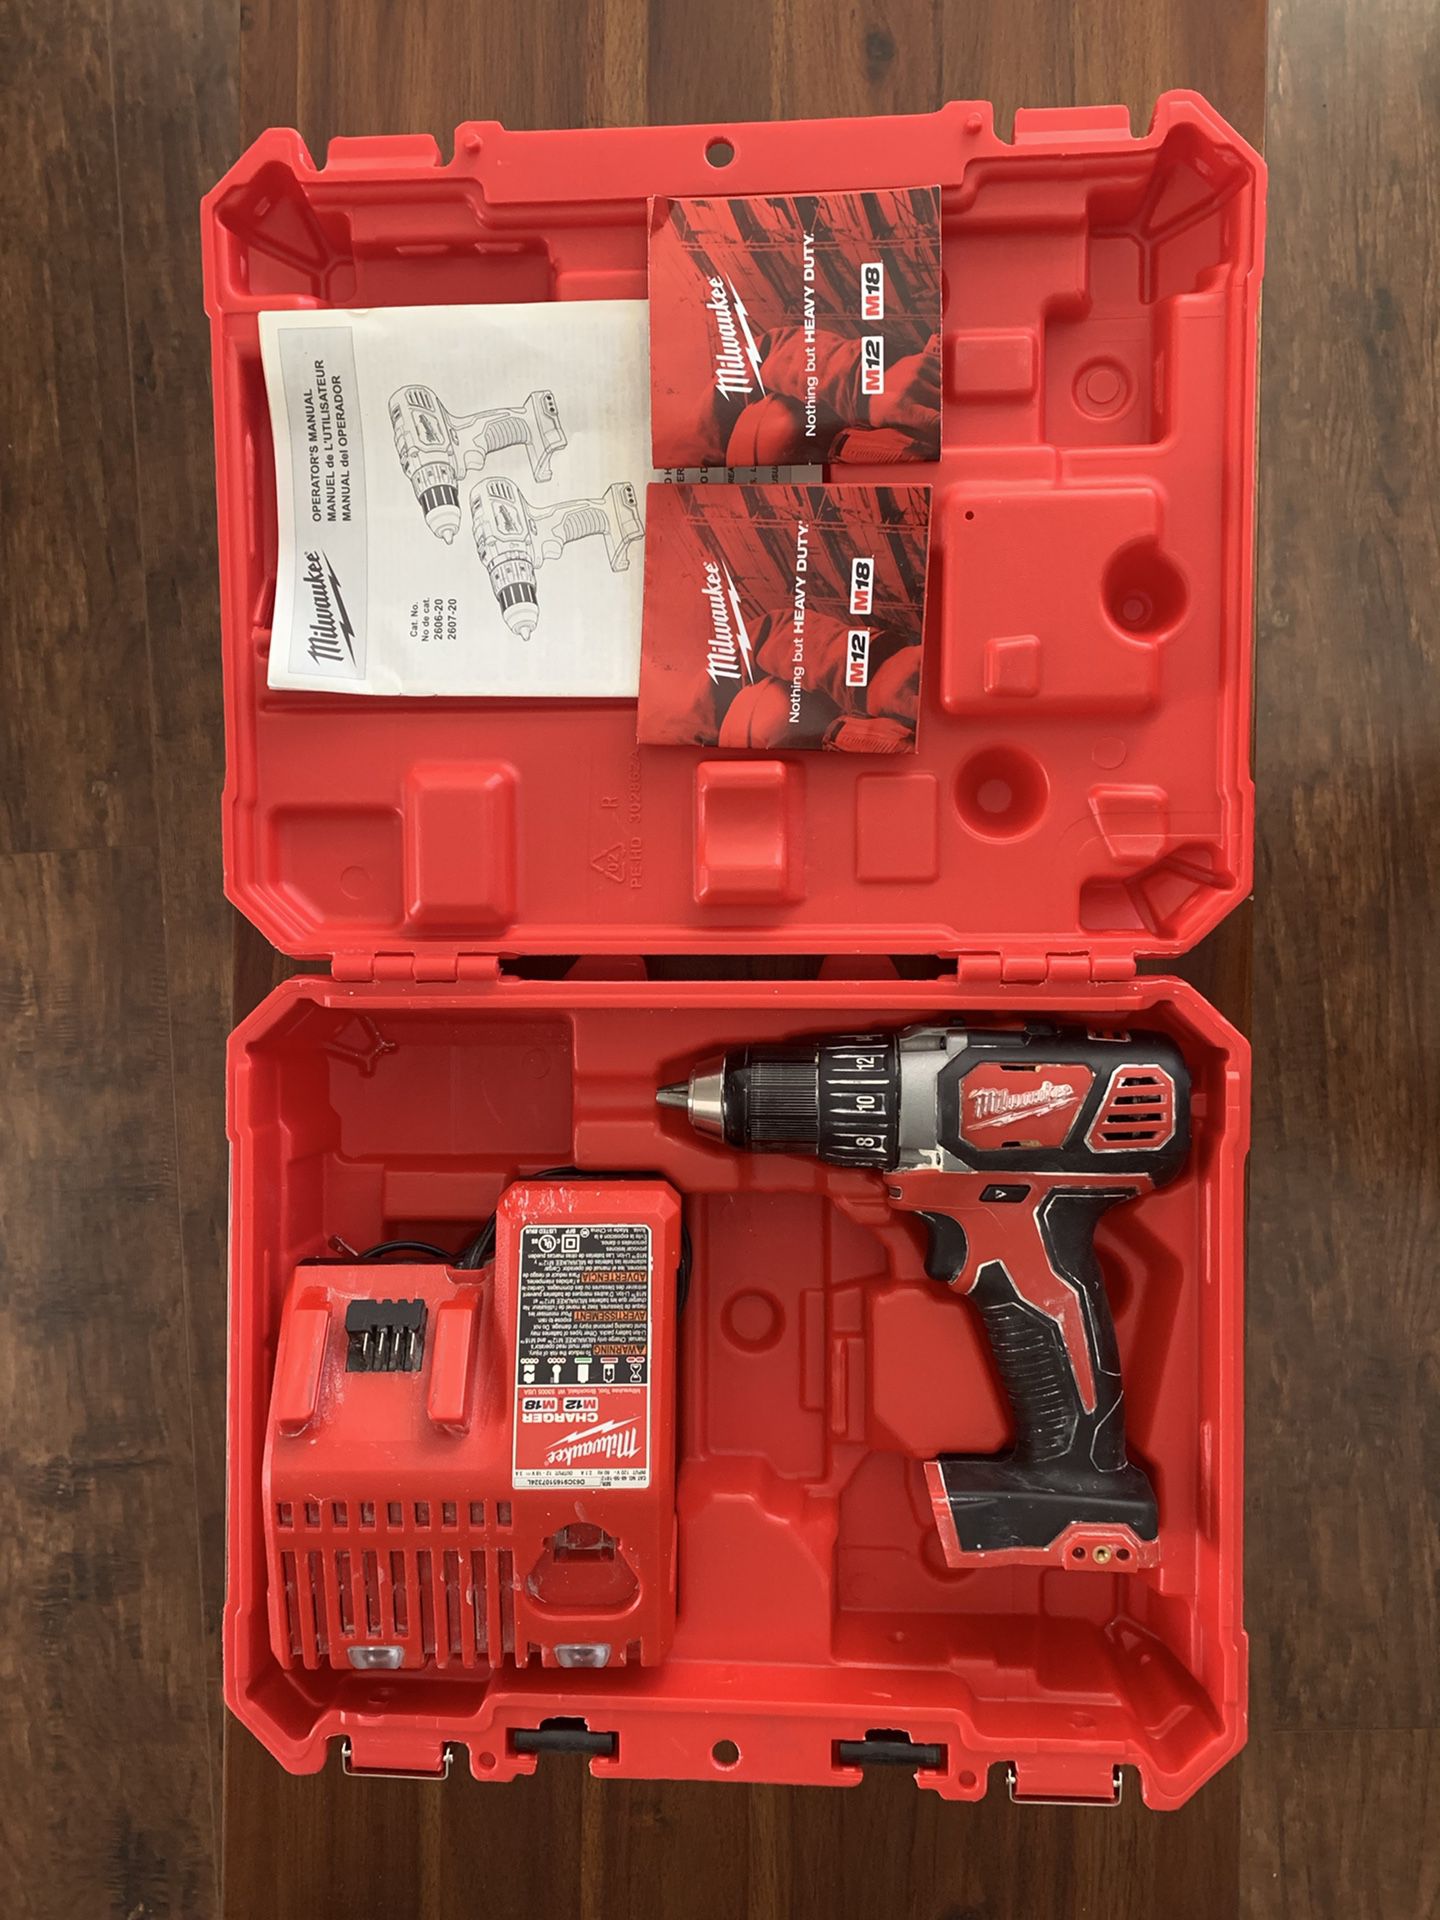 Milwaukee M18 drill with charger and carrying case